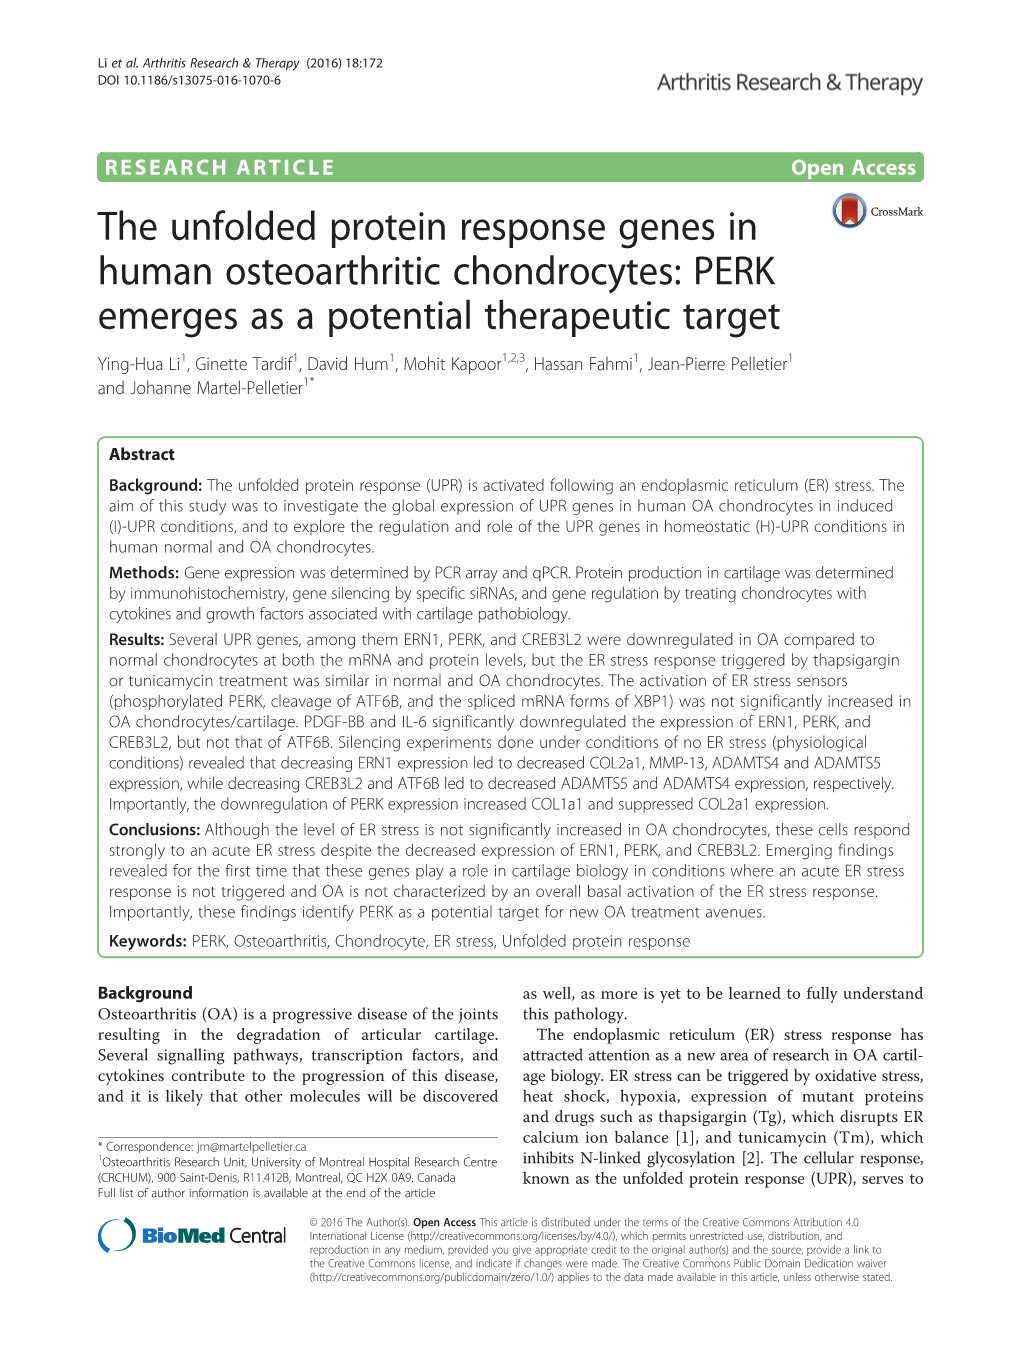 The Unfolded Protein Response Genes in Human Osteoarthritic Chondrocytes